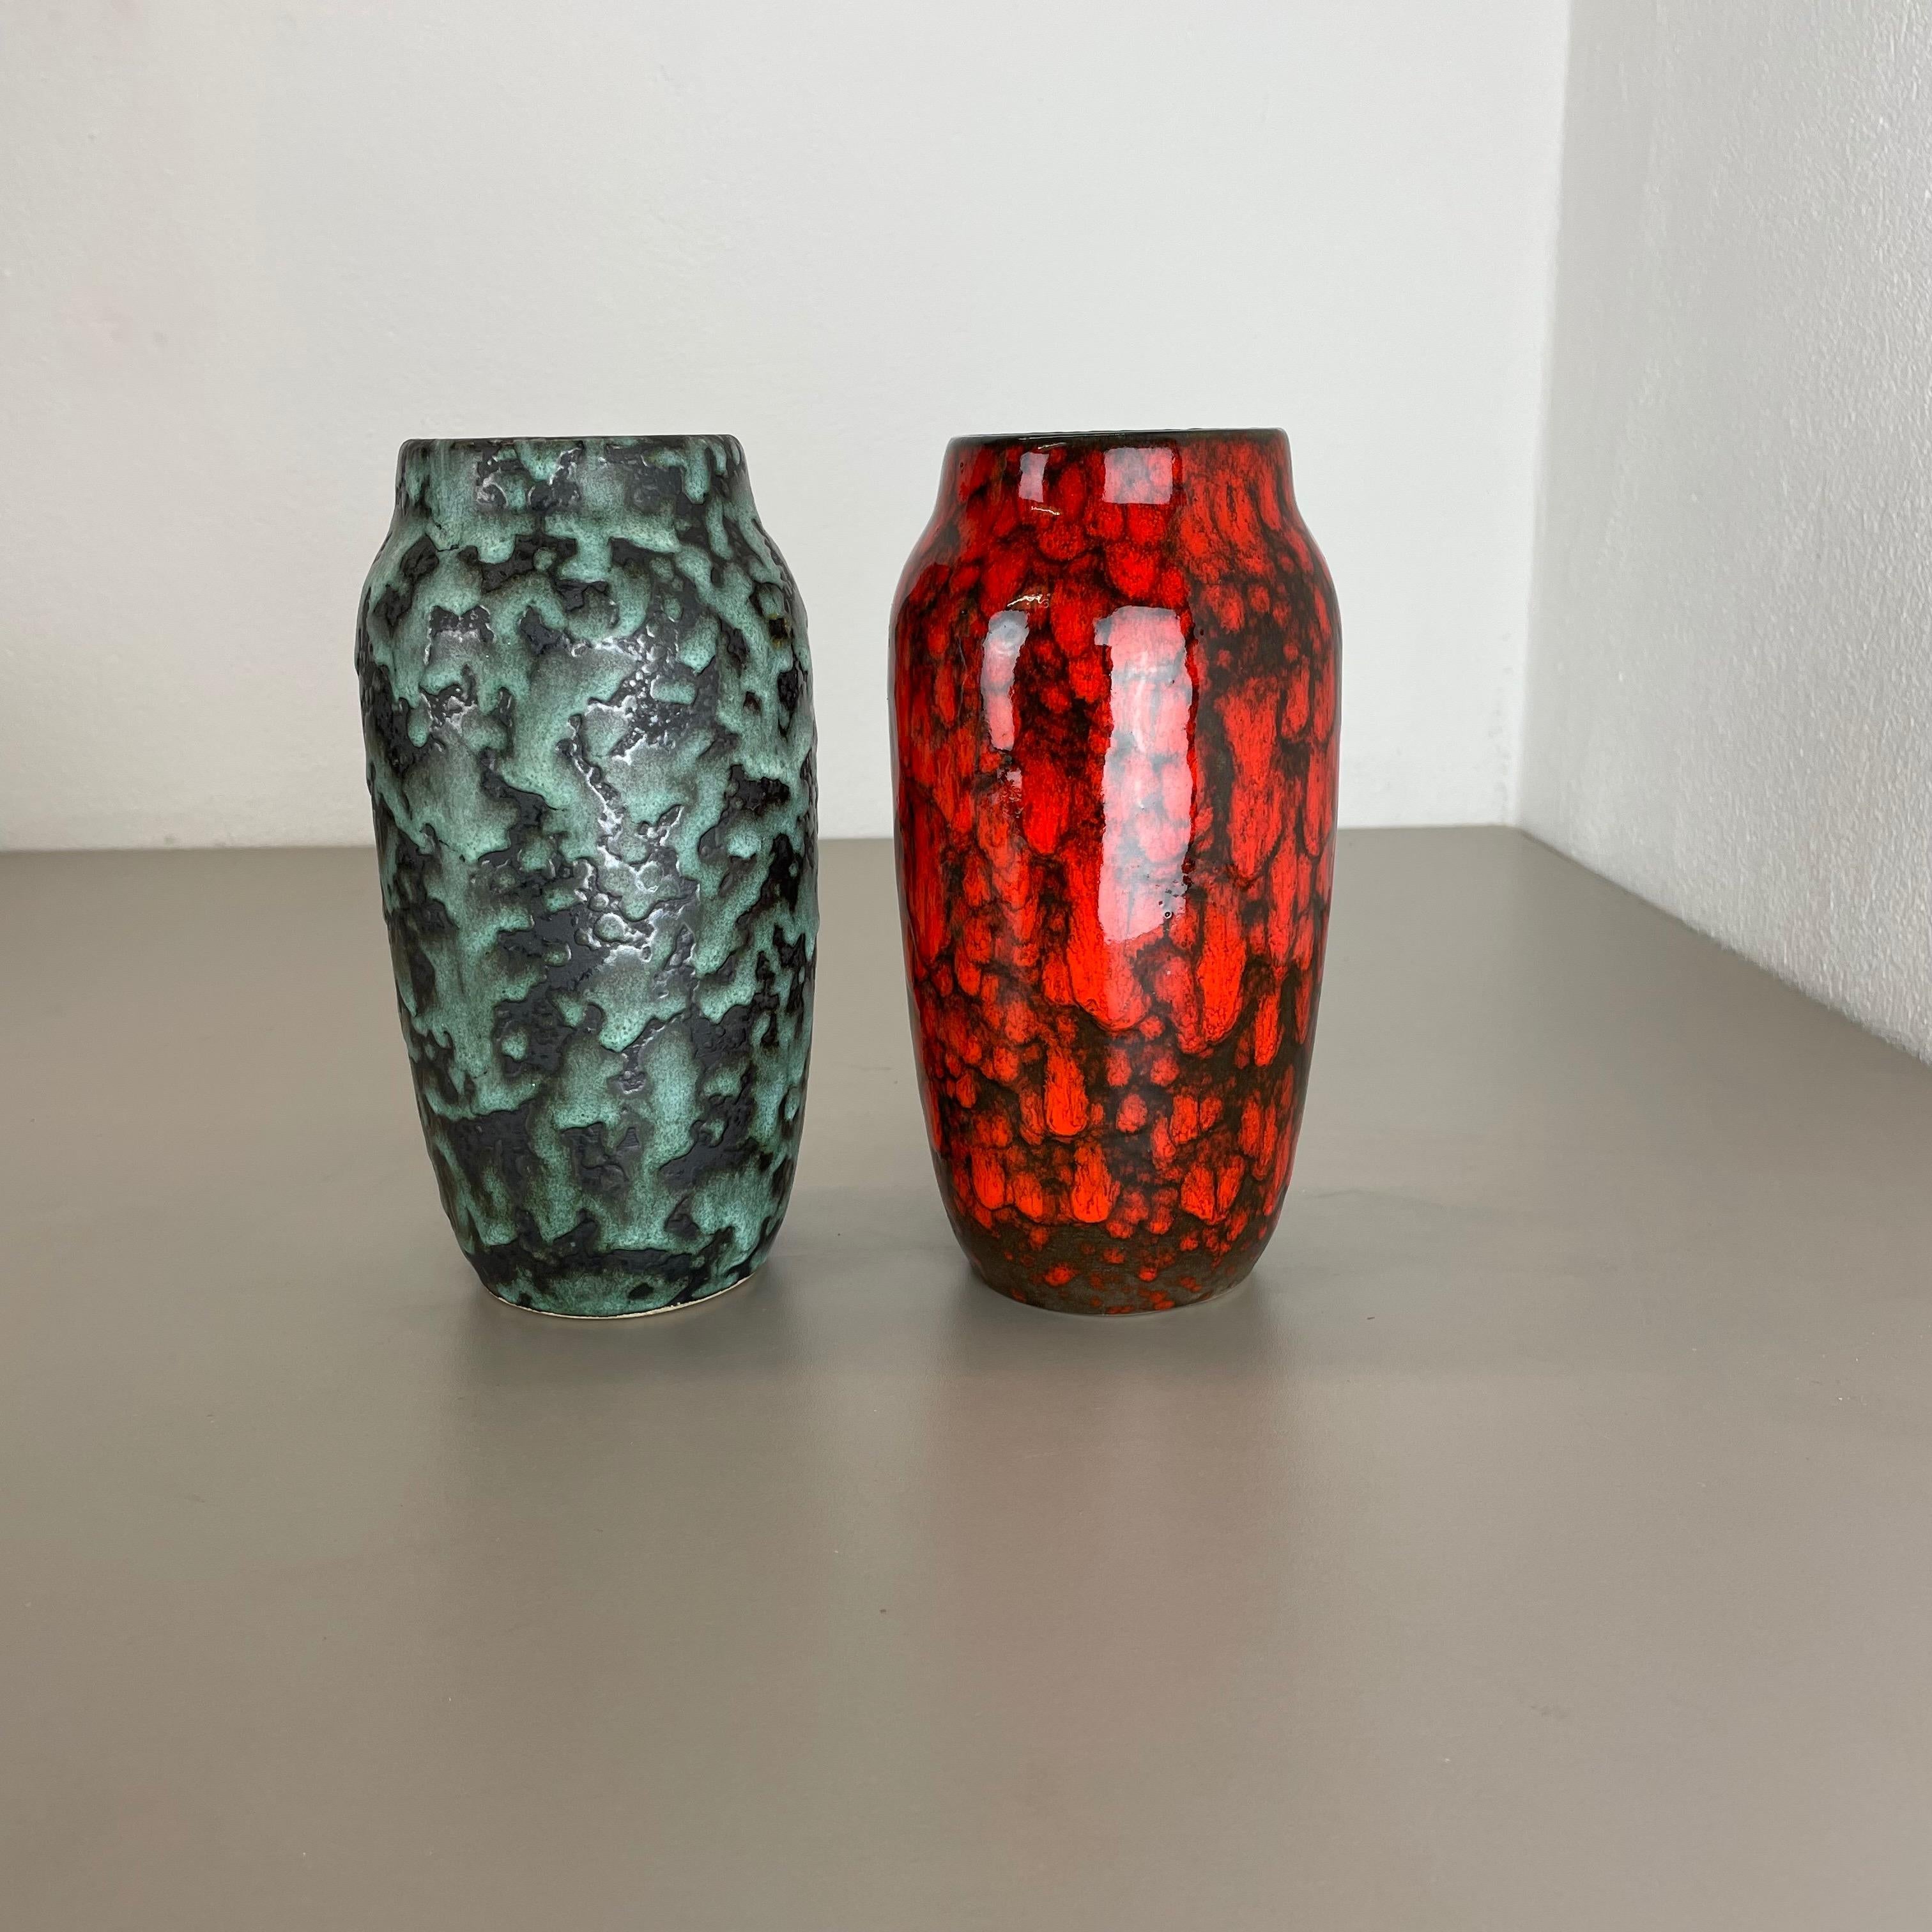 Article:

Fat lava art vase, set of 2


Producer:

Scheurich, Germany



Decade:

1970s




This original vintage vase set was produced in the 1970s in Germany. It is made of ceramic pottery in fat lava optic with abstract